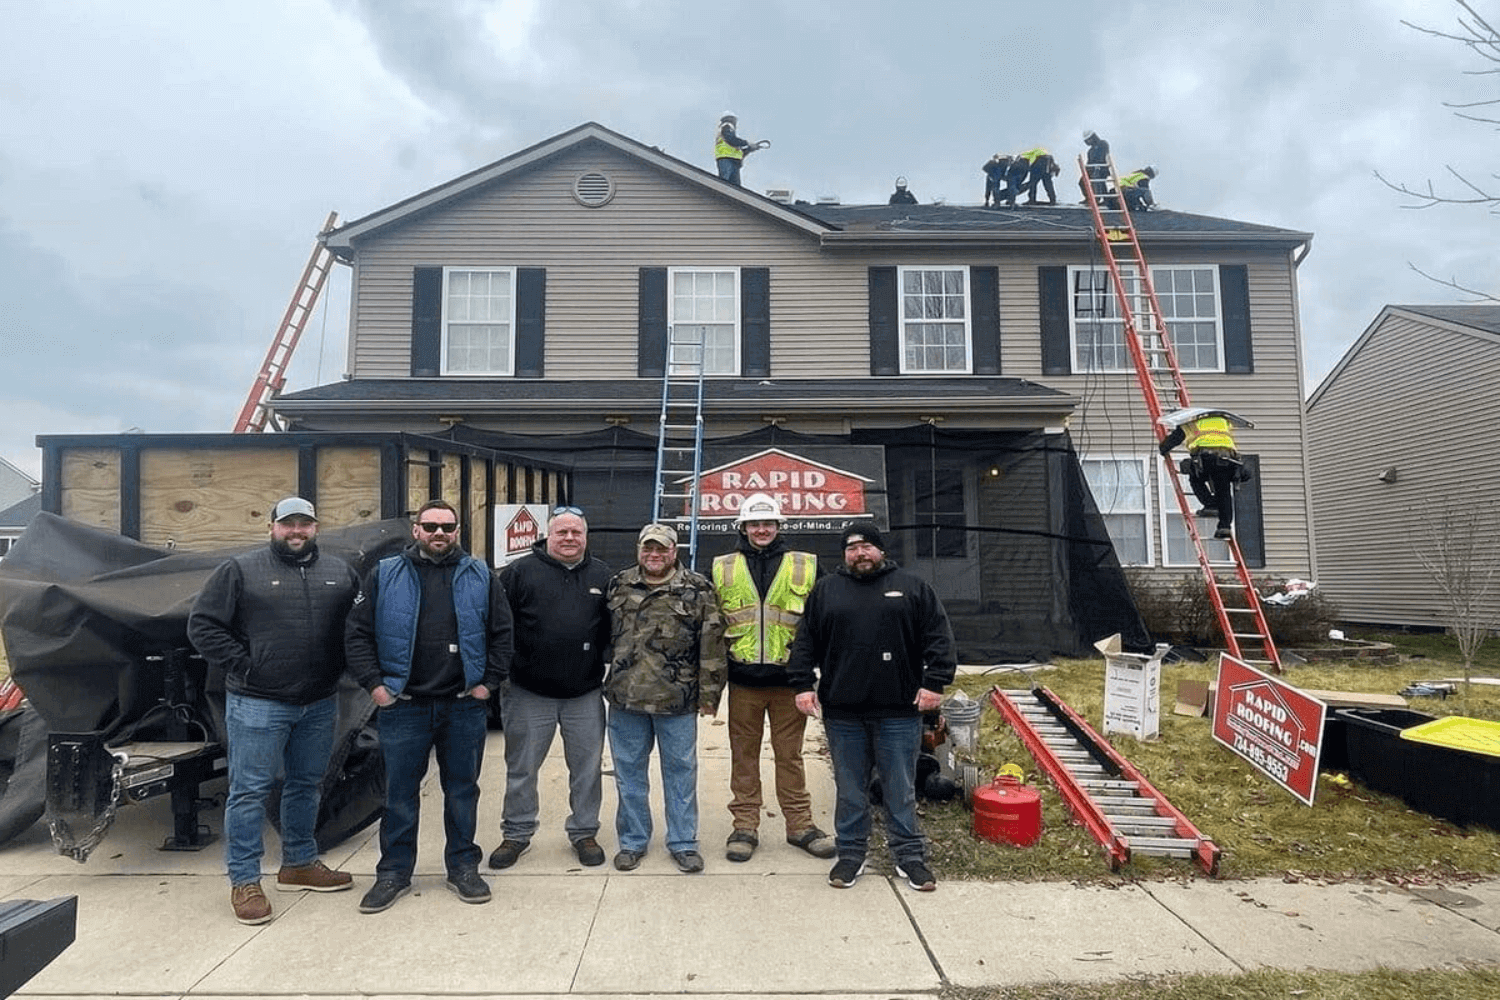 Our Professional Roofing Team Serving Ypsilanti Michigan and Surrounding Areas